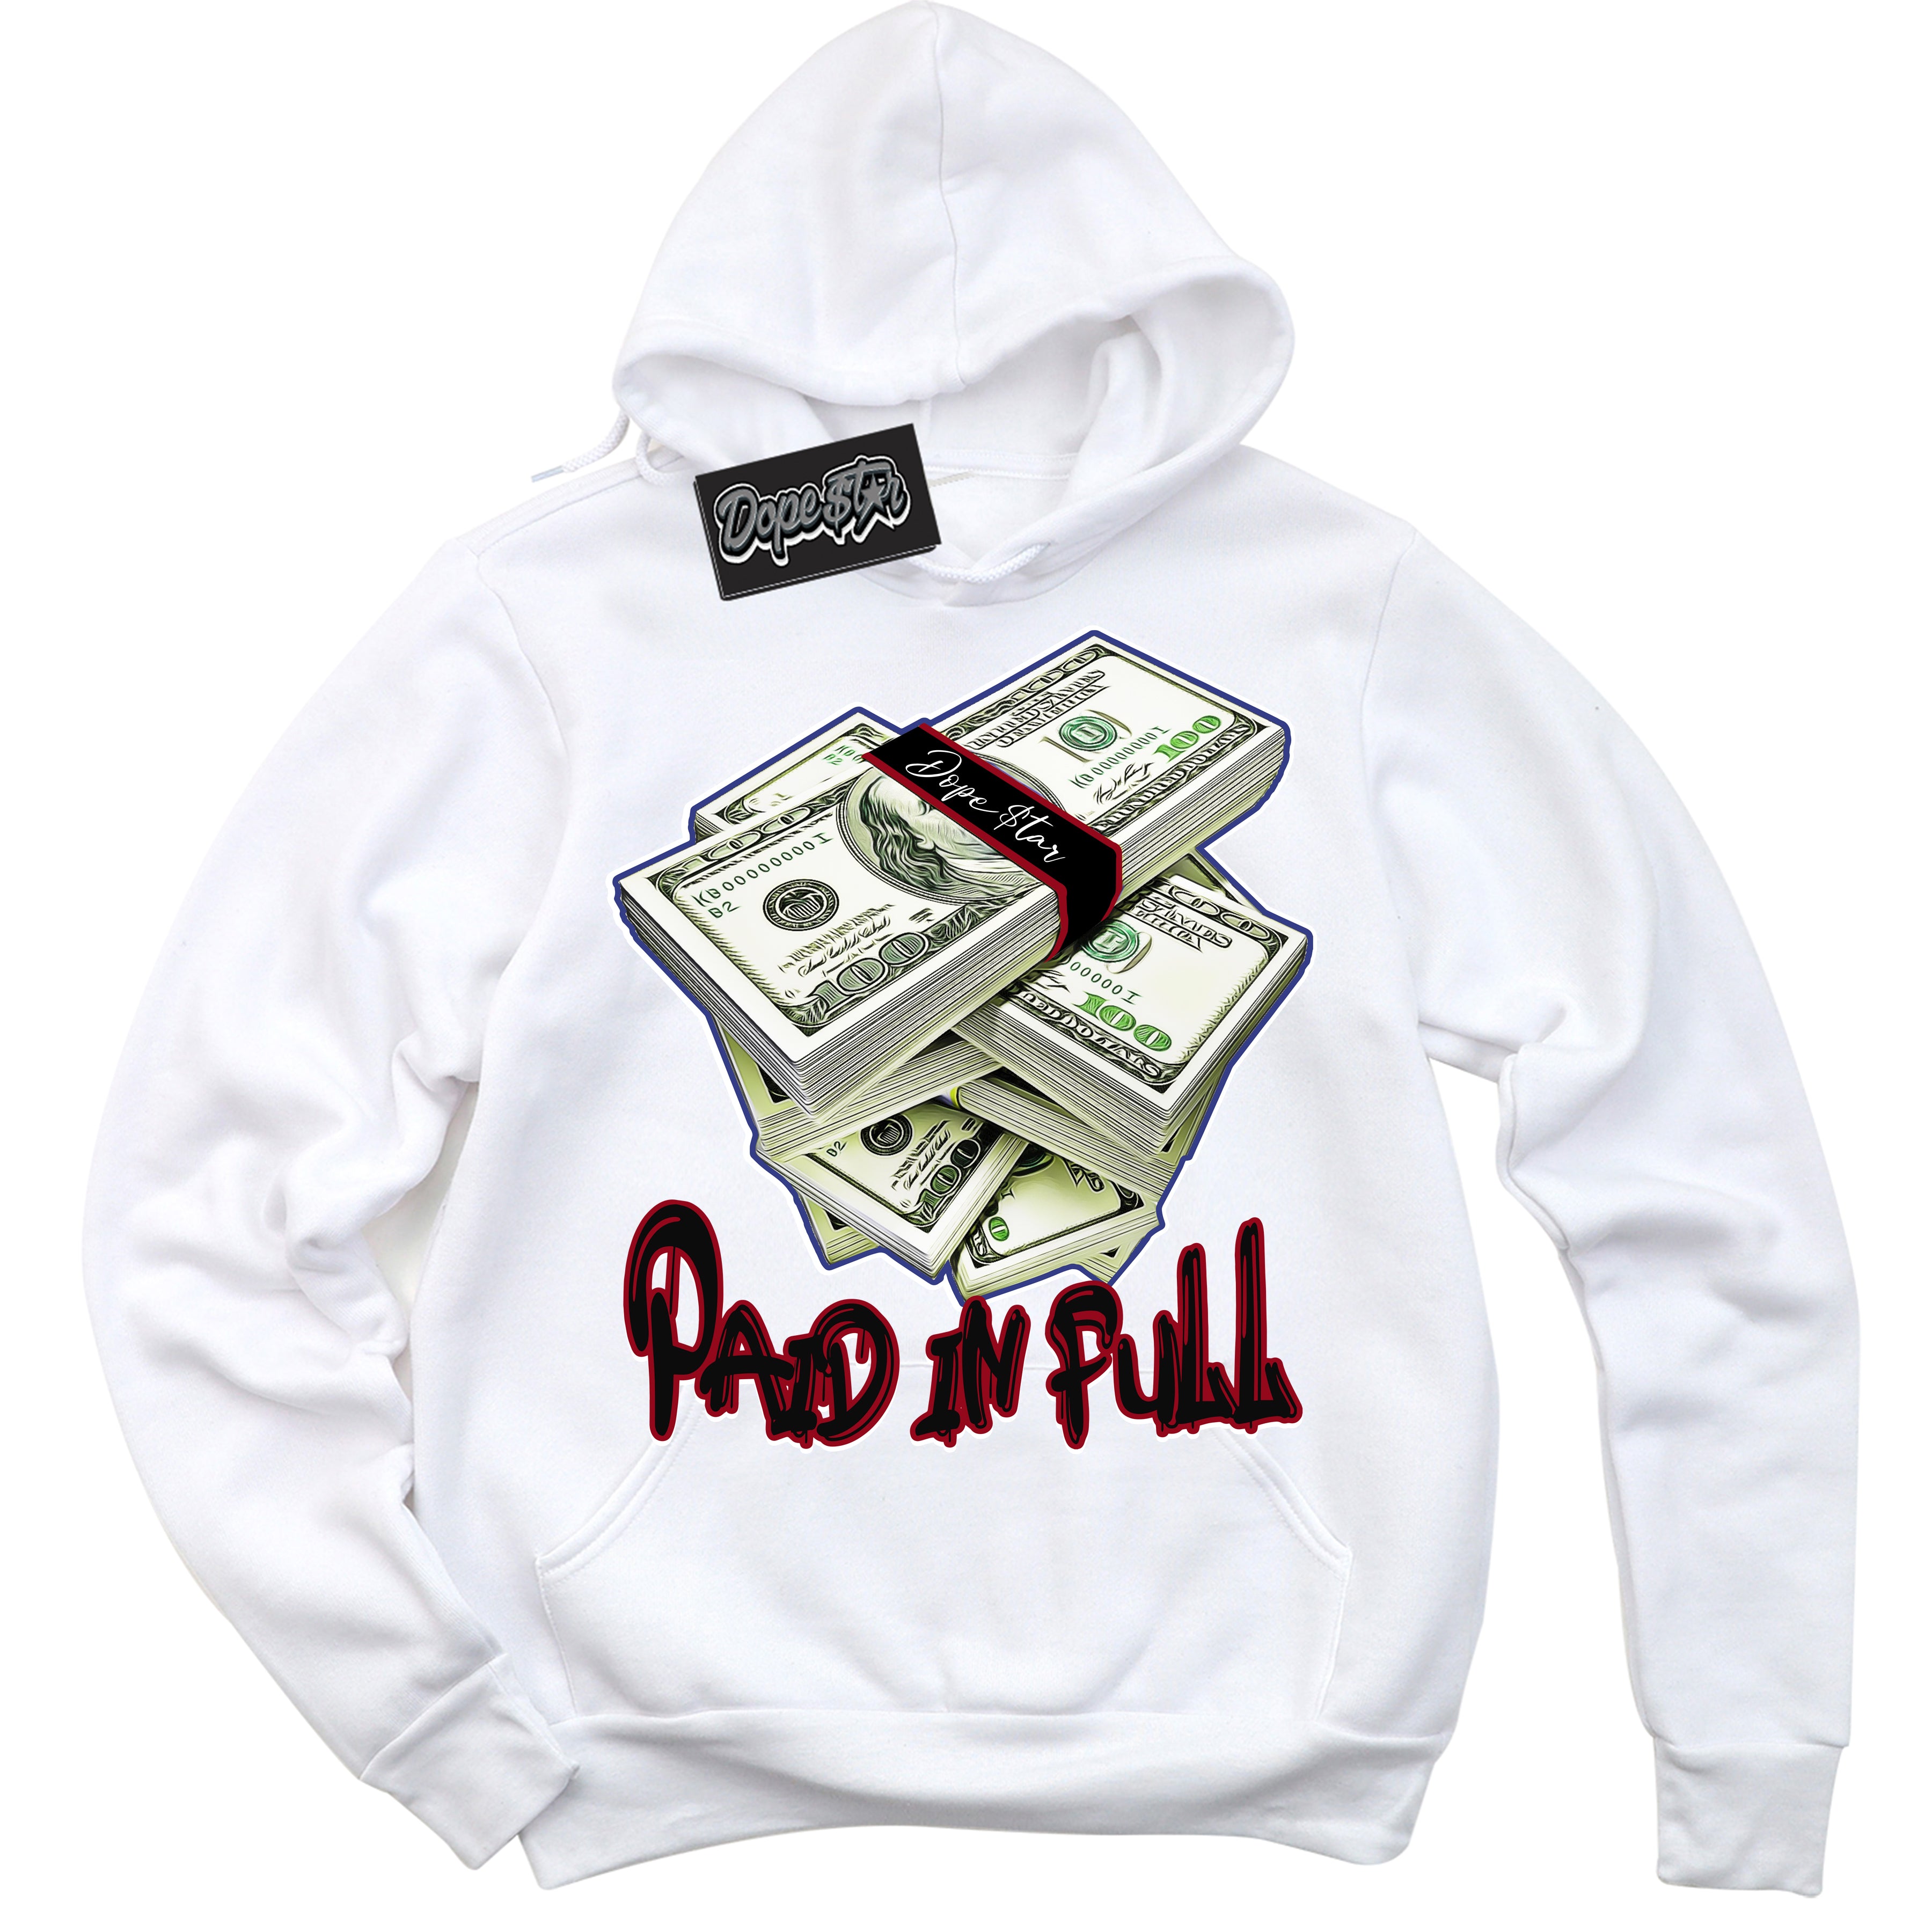 Cool White Hoodie with “ Paid In Full ”  design that Perfectly Matches Playoffs 8s Sneakers.